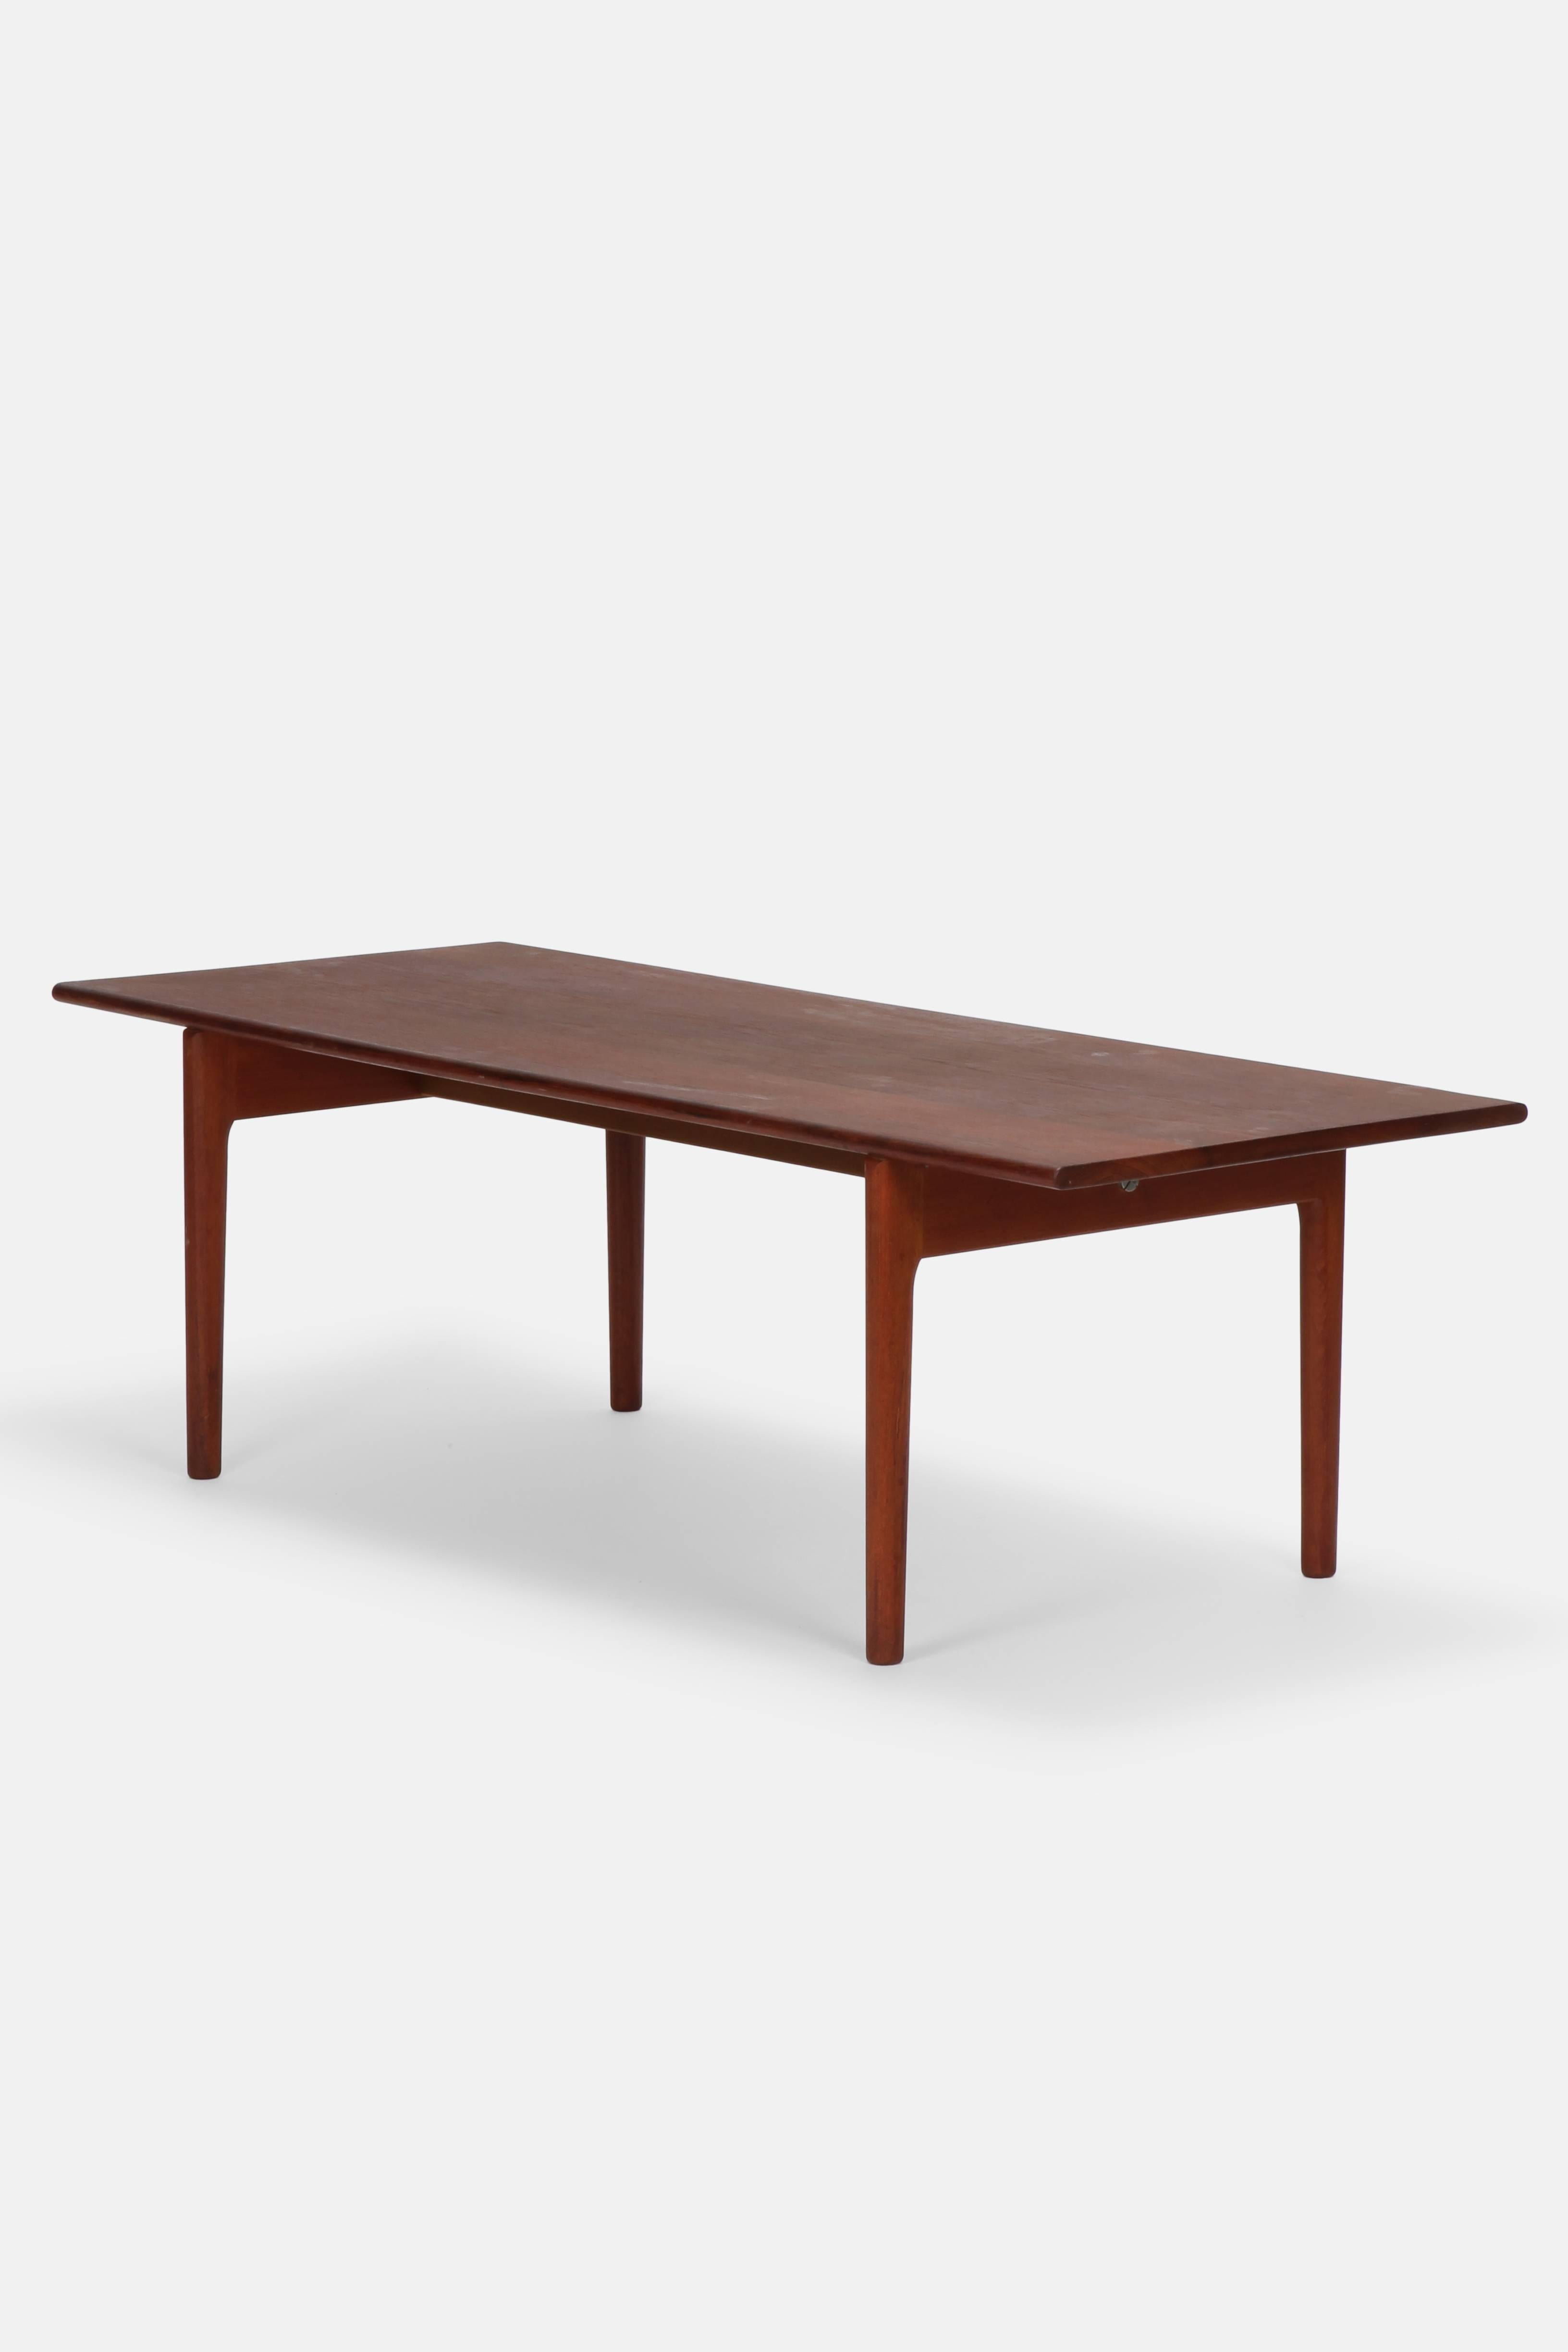 Hans J. Wegner coffee table model AT-15 manufactured by Andreas Tuck in the 1960s in Denmark. Solid teak wood with easily recognizable Hans J. Wegner design. Including makers stamp on the bottom.